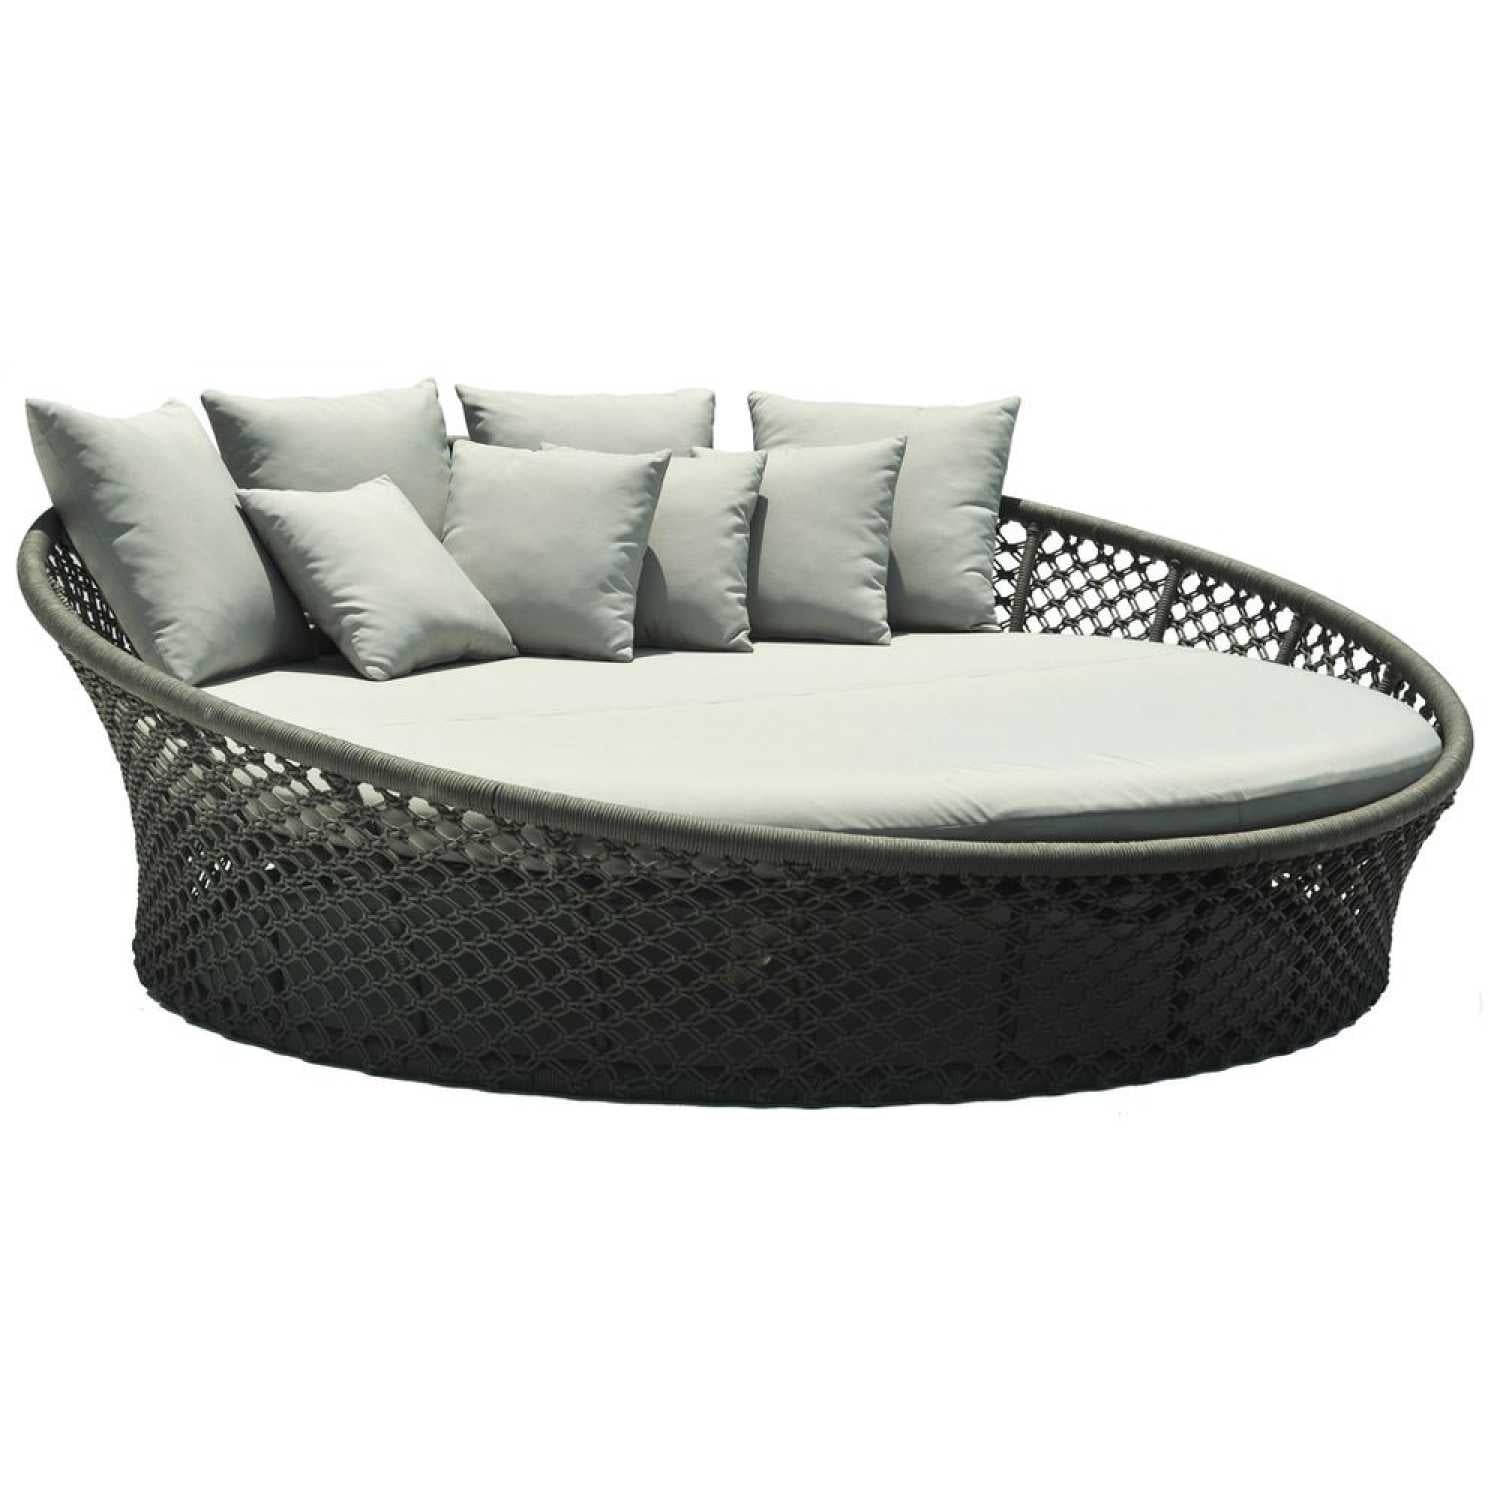 Kona Daybed - PadioLiving - Kona Daybed - Outdoor Daybed - Anthracite 6mm Poly Rope / Metal- Optik (£4556) - PadioLiving